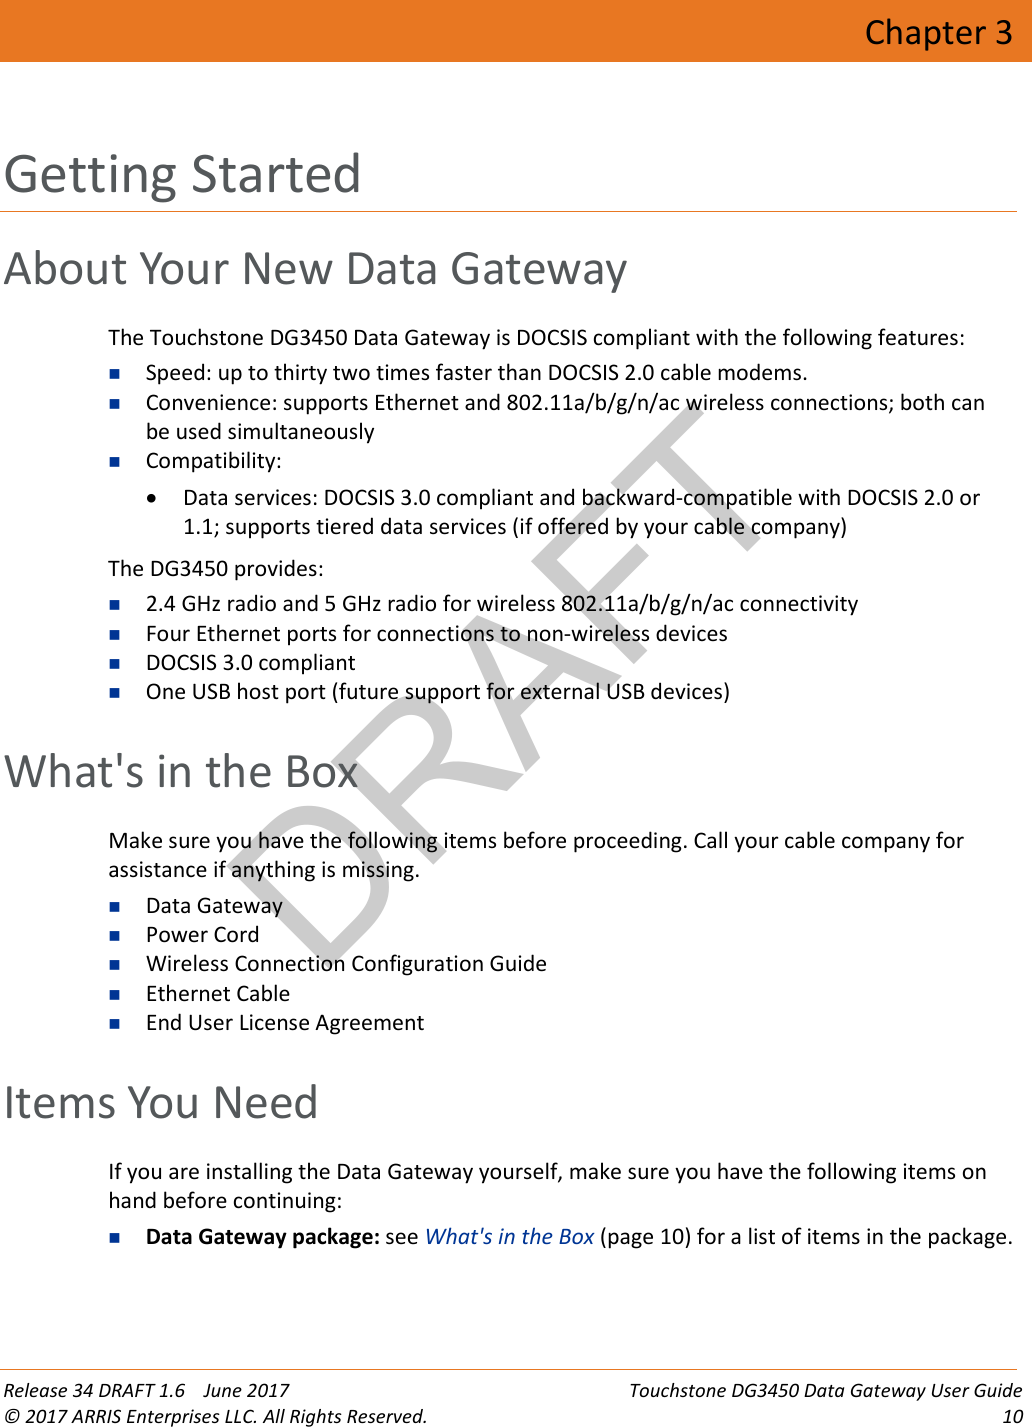 DRAFT Release 34 DRAFT 1.6    June 2017 Touchstone DG3450 Data Gateway User Guide © 2017 ARRIS Enterprises LLC. All Rights Reserved. 10  Chapter 3 Getting Started About Your New Data Gateway The Touchstone DG3450 Data Gateway is DOCSIS compliant with the following features:  Speed: up to thirty two times faster than DOCSIS 2.0 cable modems.  Convenience: supports Ethernet and 802.11a/b/g/n/ac wireless connections; both can be used simultaneously  Compatibility:  • Data services: DOCSIS 3.0 compliant and backward-compatible with DOCSIS 2.0 or 1.1; supports tiered data services (if offered by your cable company) The DG3450 provides:  2.4 GHz radio and 5 GHz radio for wireless 802.11a/b/g/n/ac connectivity  Four Ethernet ports for connections to non-wireless devices  DOCSIS 3.0 compliant  One USB host port (future support for external USB devices)   What&apos;s in the Box Make sure you have the following items before proceeding. Call your cable company for assistance if anything is missing.  Data Gateway  Power Cord  Wireless Connection Configuration Guide  Ethernet Cable  End User License Agreement   Items You Need If you are installing the Data Gateway yourself, make sure you have the following items on hand before continuing:  Data Gateway package: see What&apos;s in the Box (page 10) for a list of items in the package. 